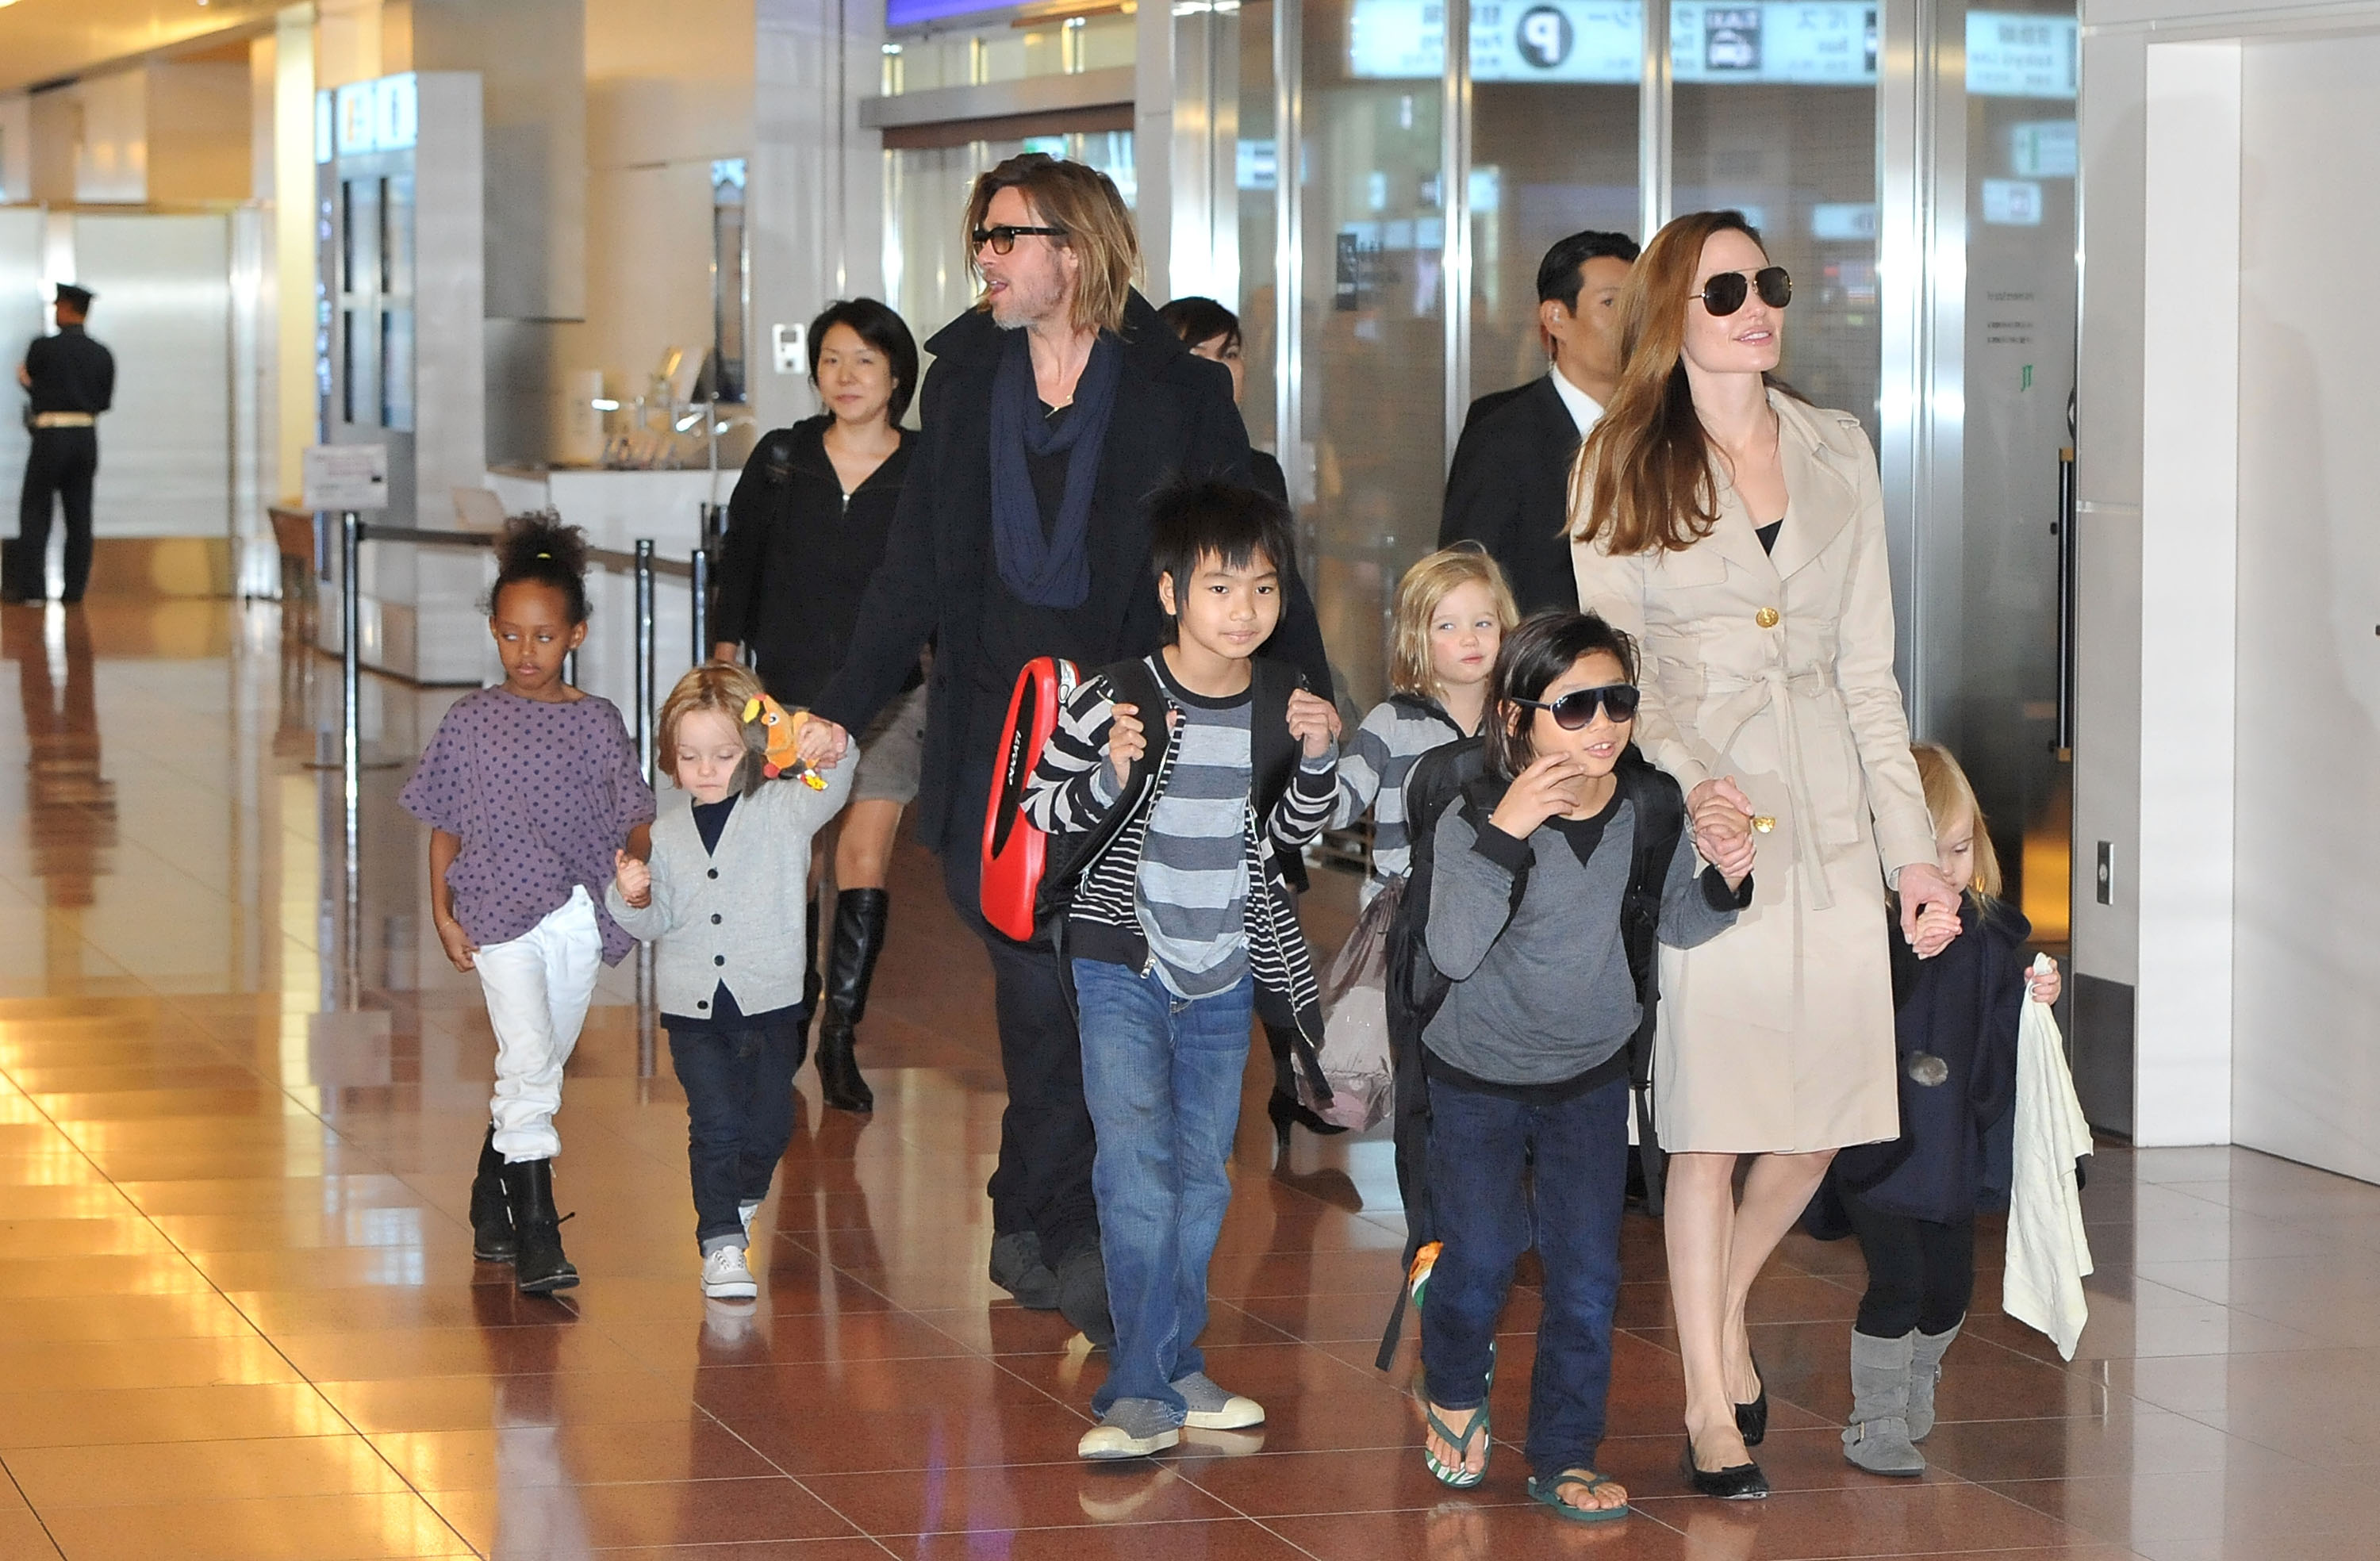 Brad Pitt, Angelina Jolie and their children Maddox, Pax, Zahara, Shiloh, Knox, and Vivienne in Tokyo, Japan | Source: Getty Images